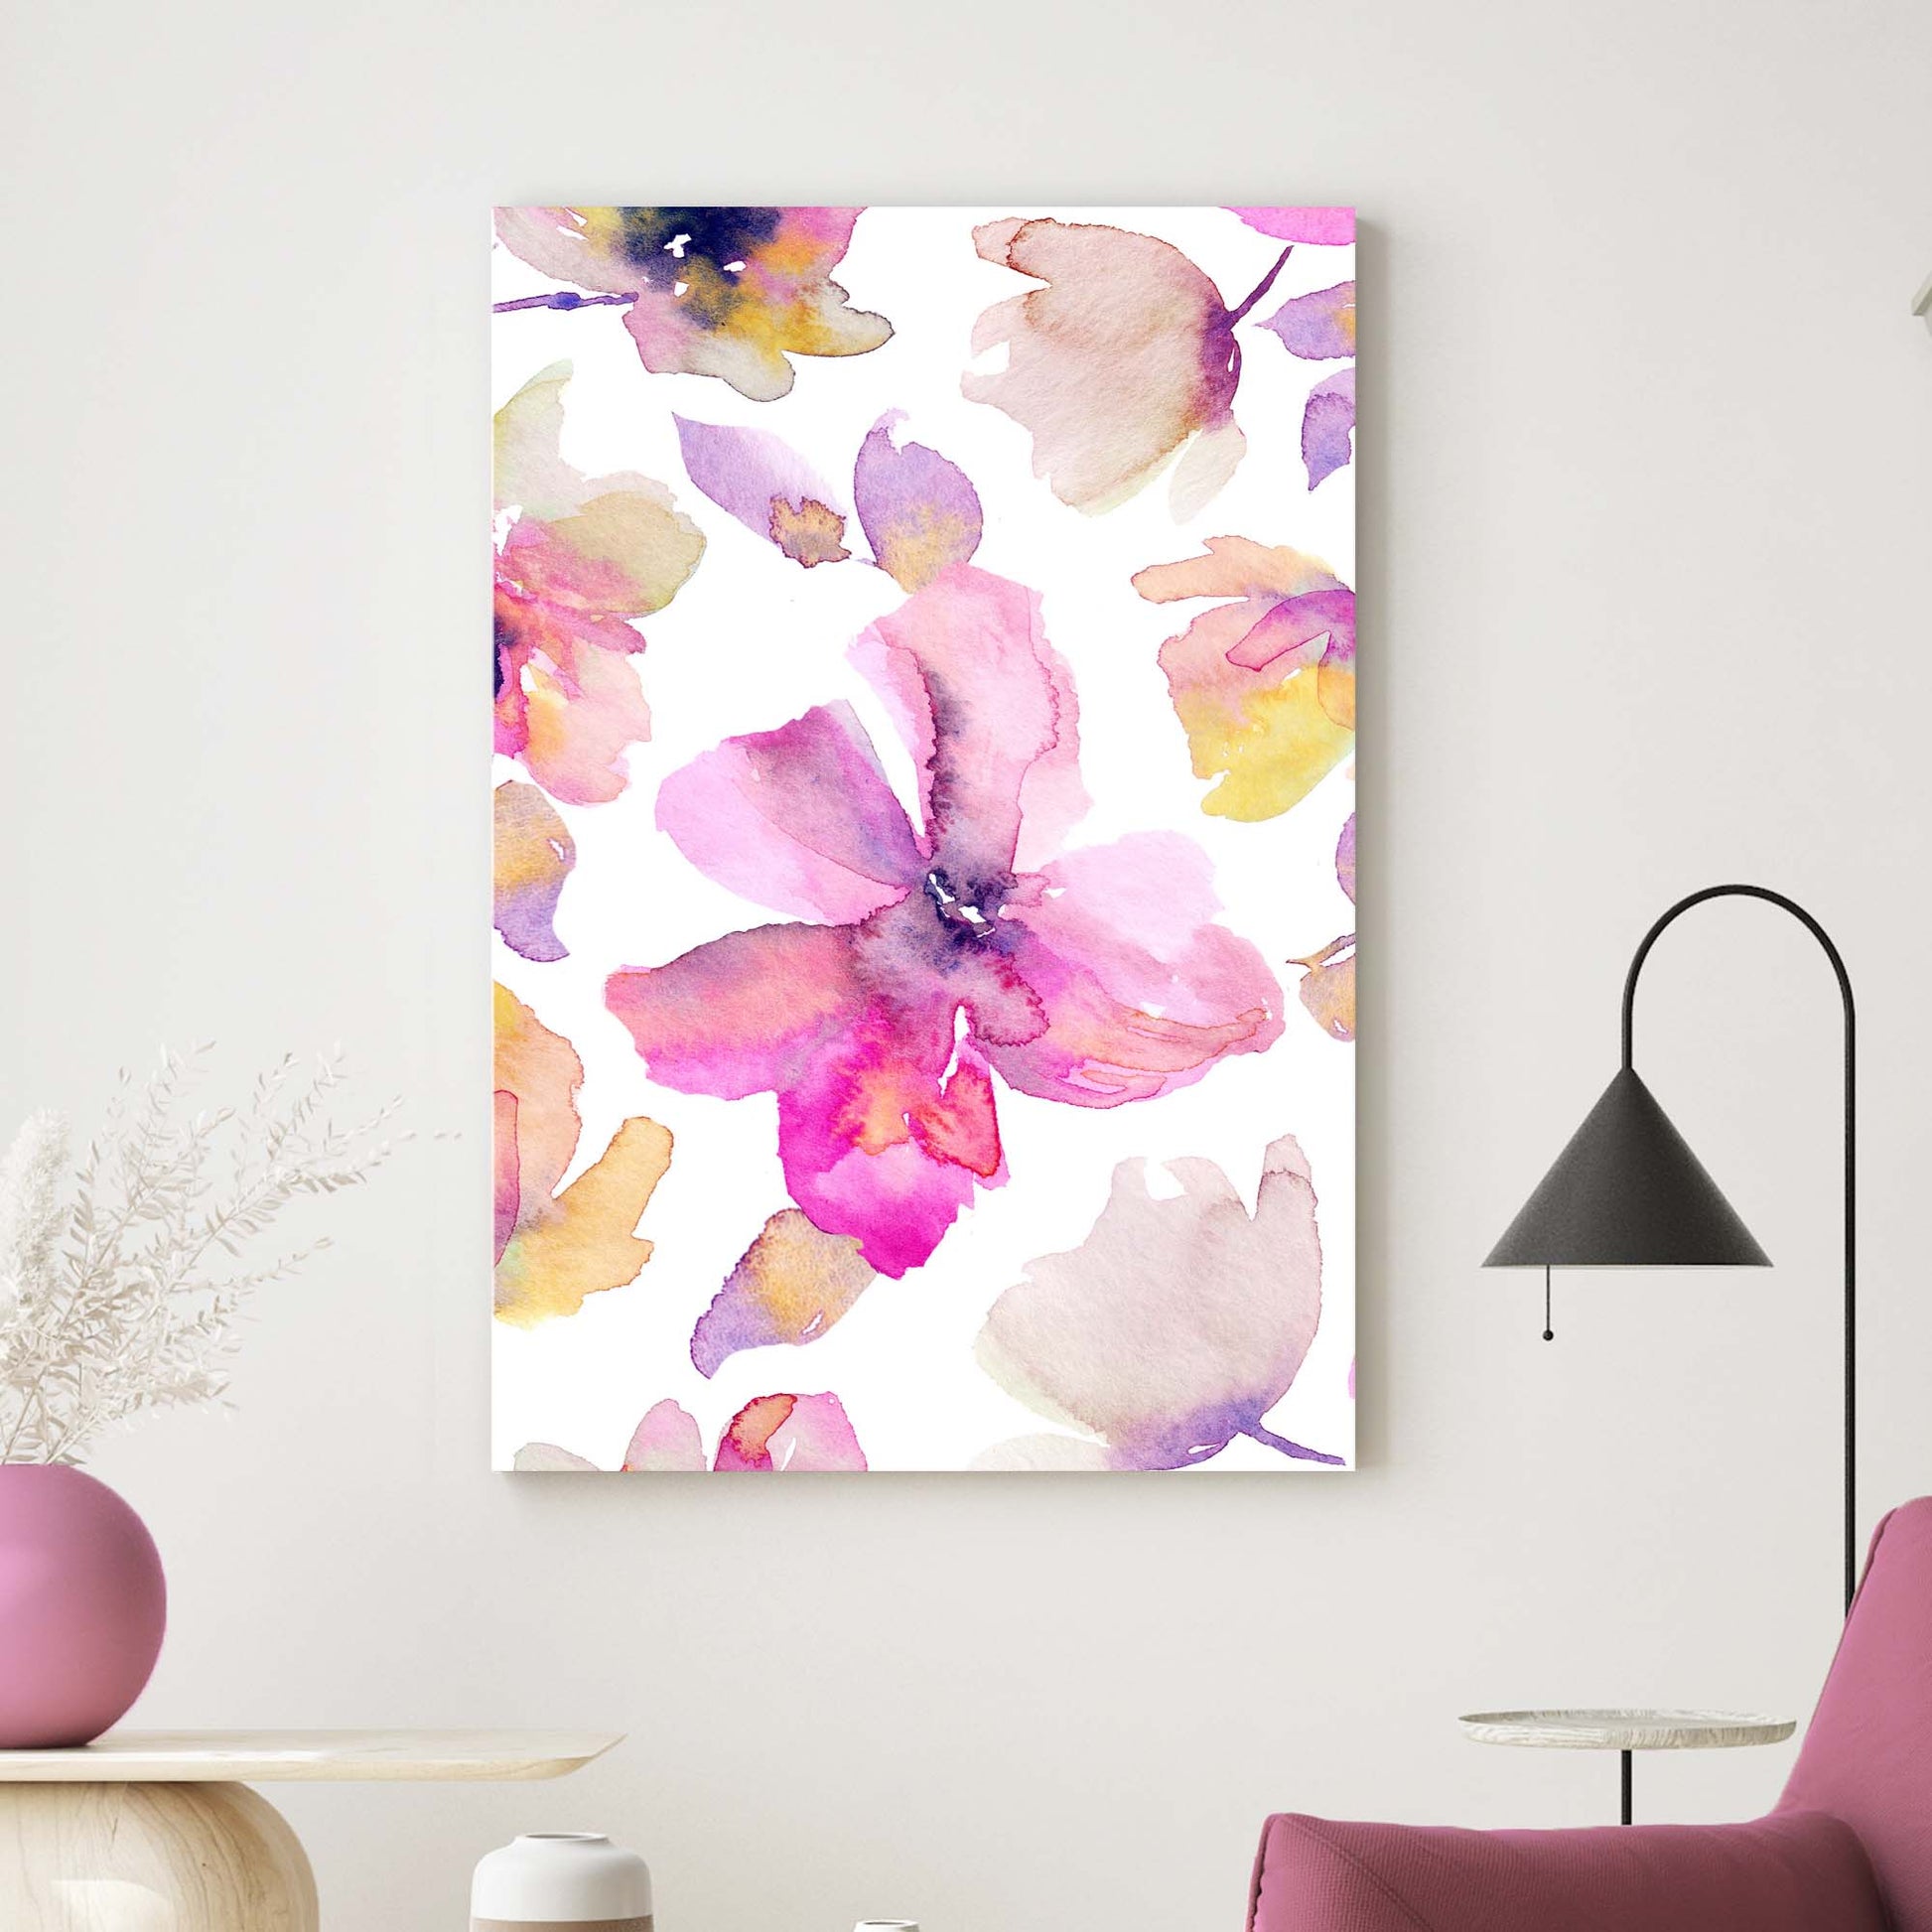 Flowers Hibiscus Heavenly Watercolor Canvas Wall Art - Image by Tailored Canvases